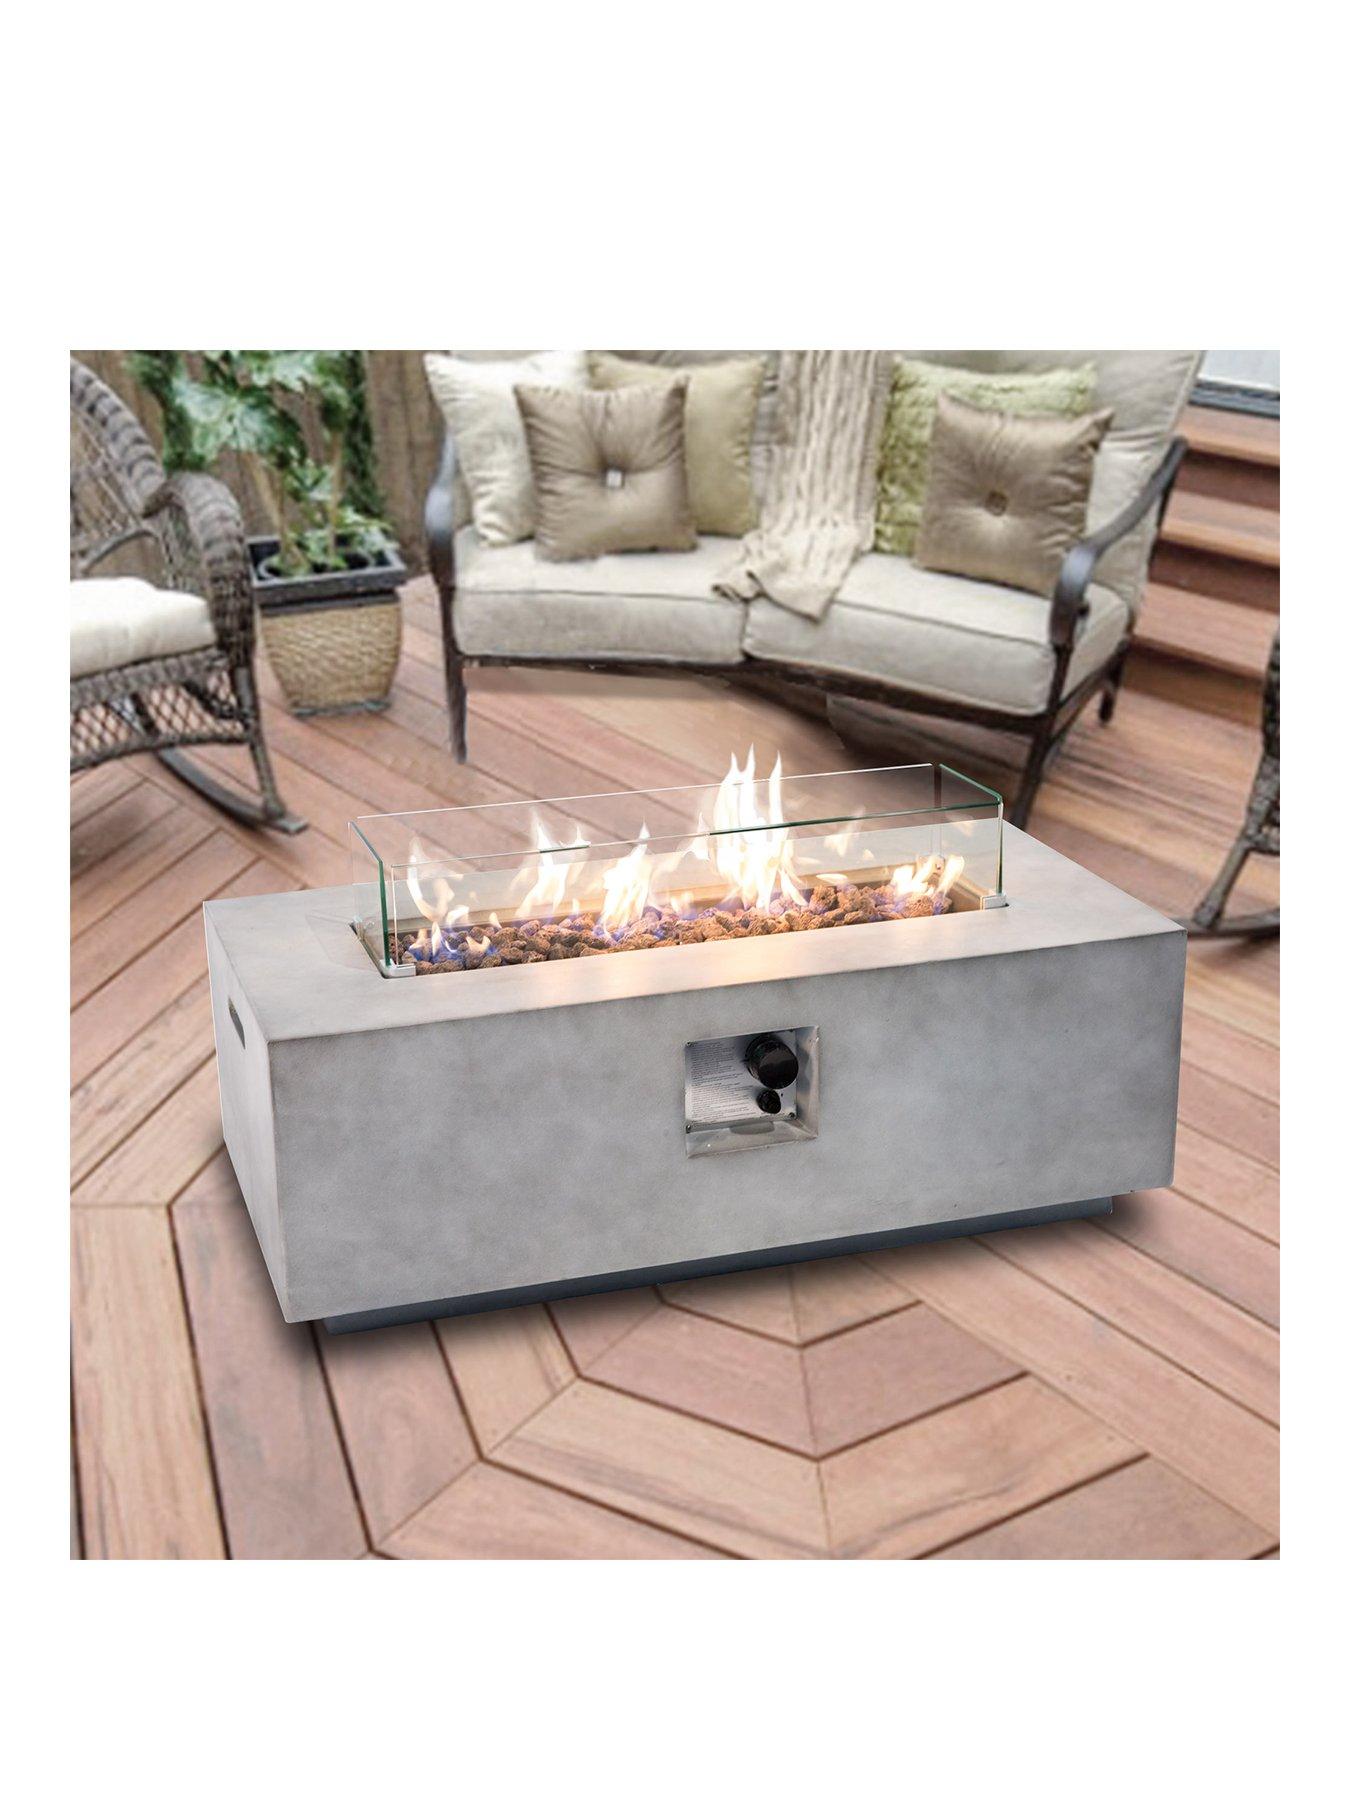 Teamson Home Peaktop Firepit Outdoor Gas Fire Pit Stone With Lava Rock And Cover